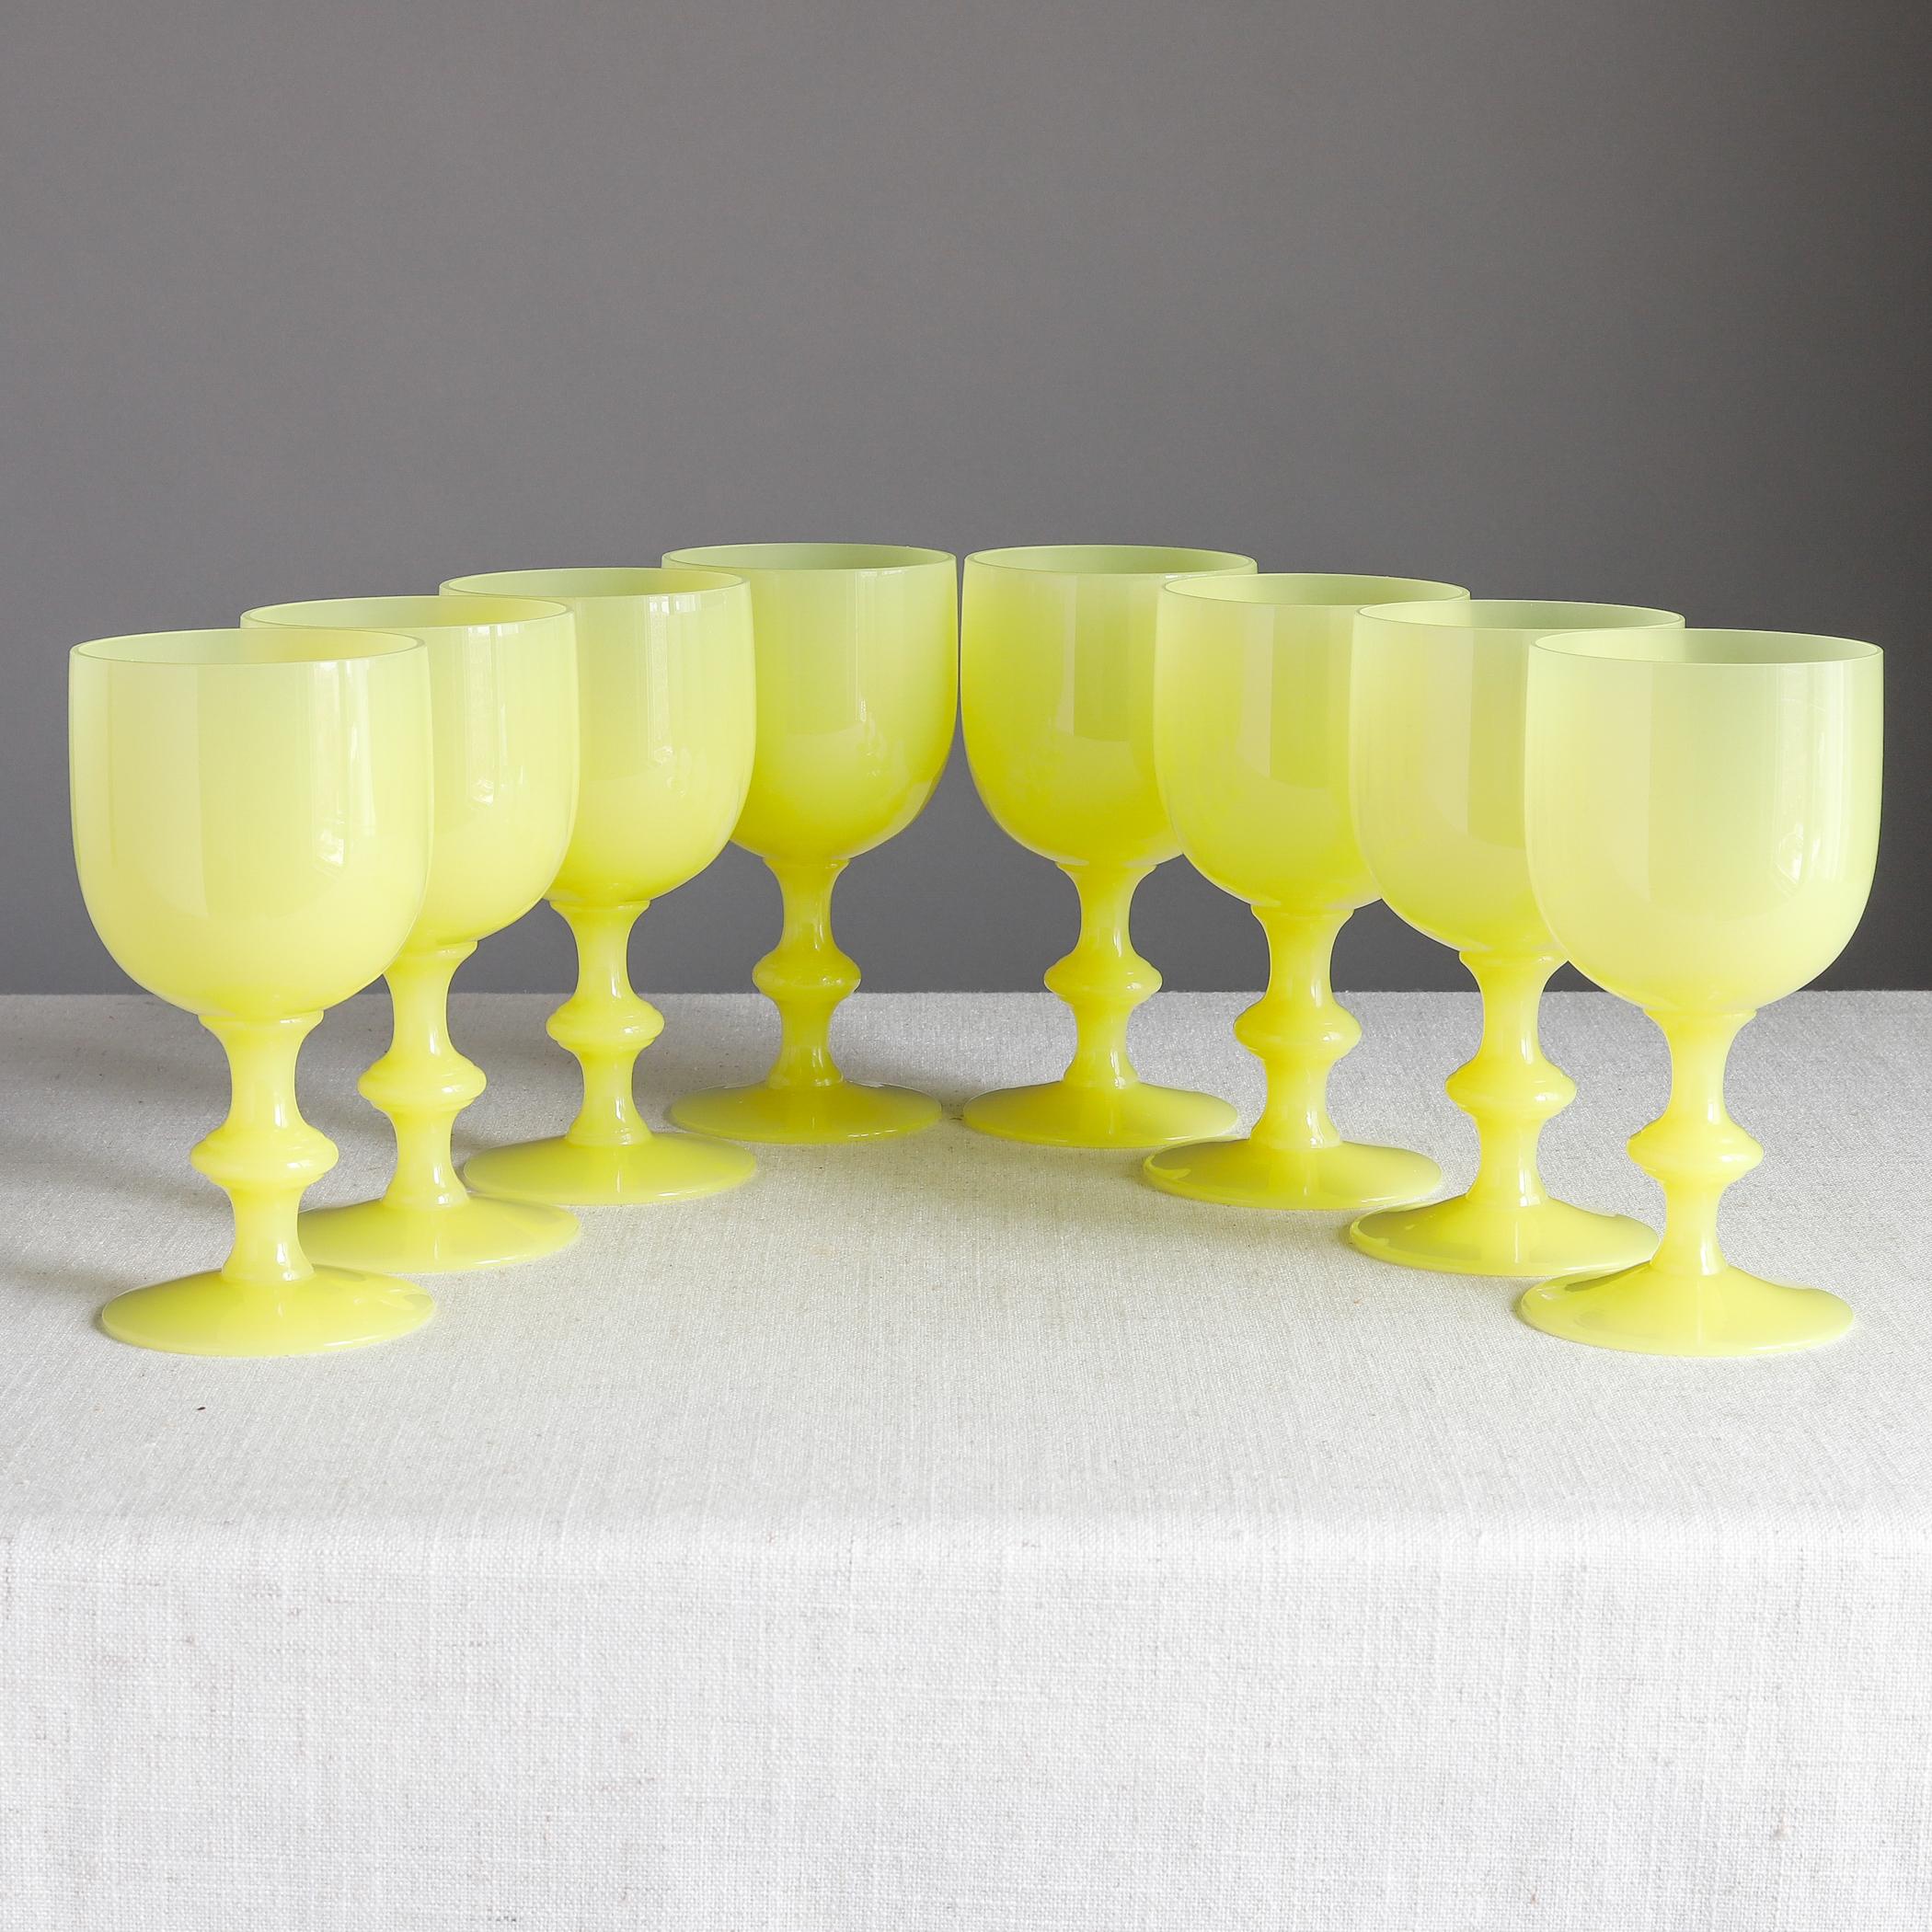 Set of eight yellow opaline glass goblets for water or wine by Portieux Vallerysthal of France, each with a knopped stem. 

Each measures about 6 1/2 inches high, 3 3/8 inches diameter across the mouth, mid-20th century.

Overall condition is